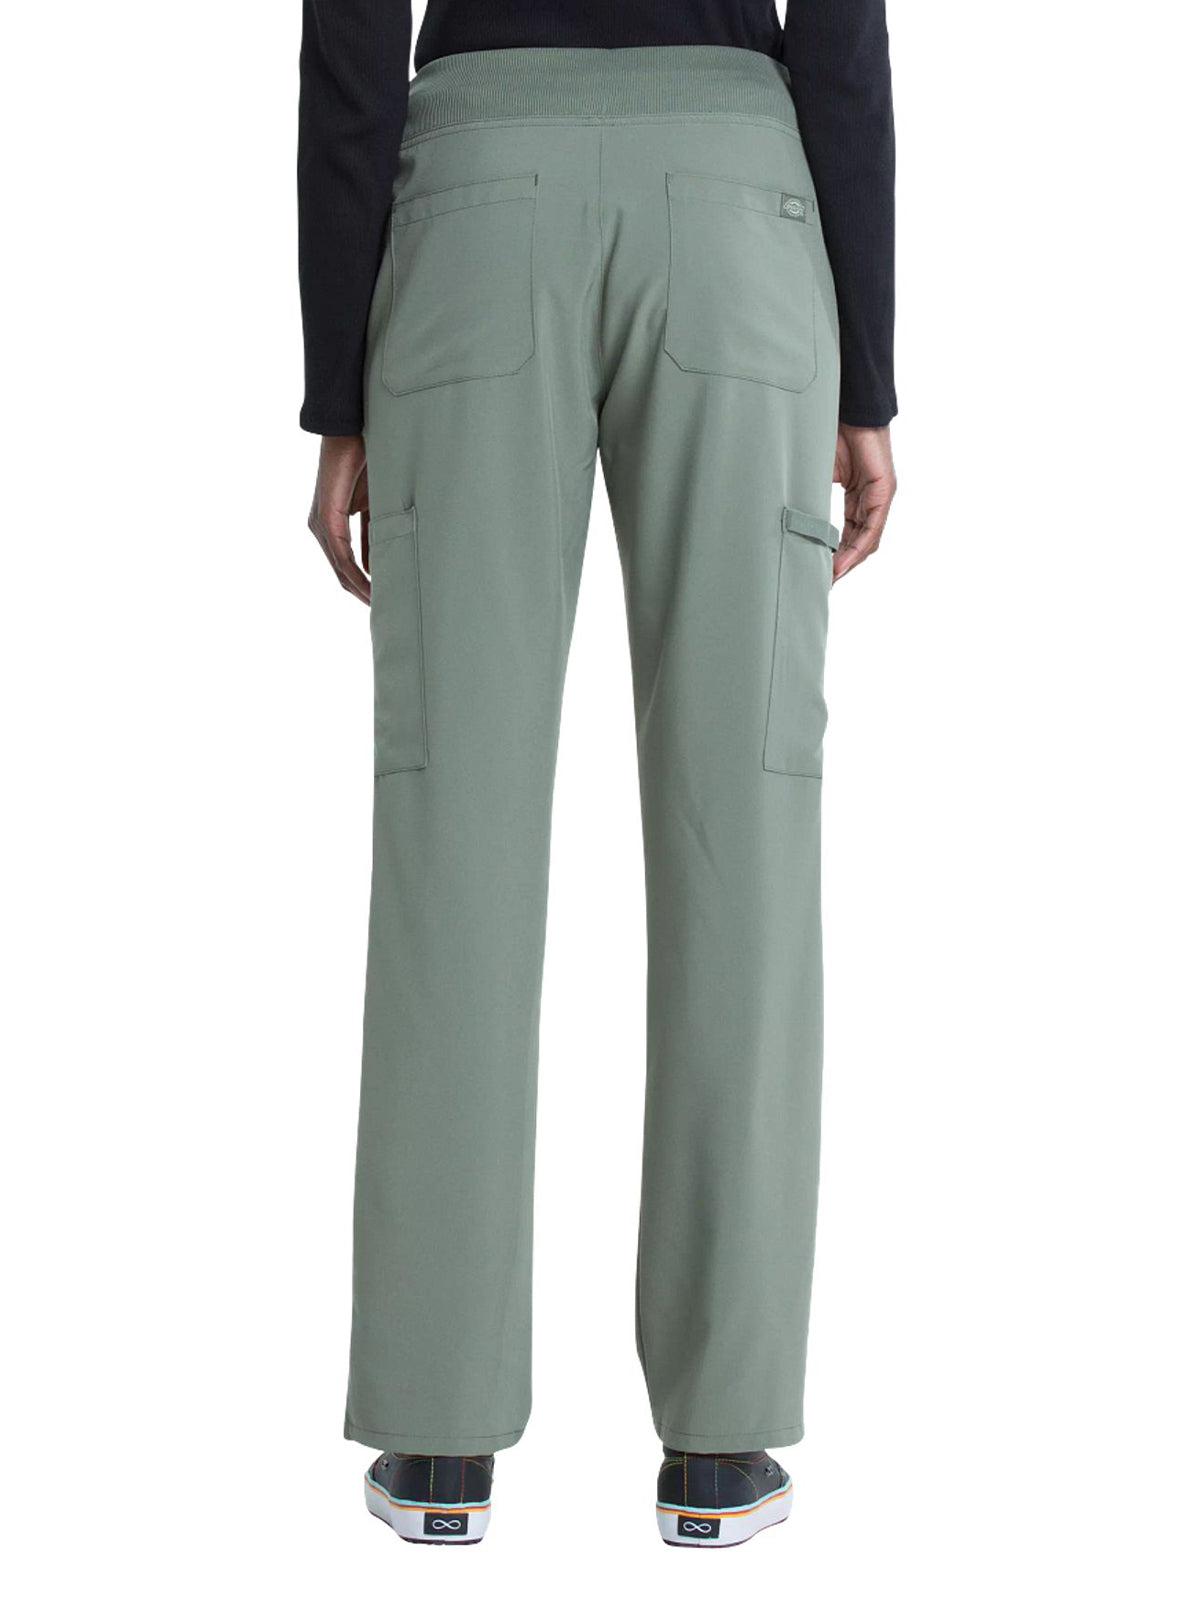 Women's Natural Rise Tapered Leg Pull-On Pant - DK005 - Olive